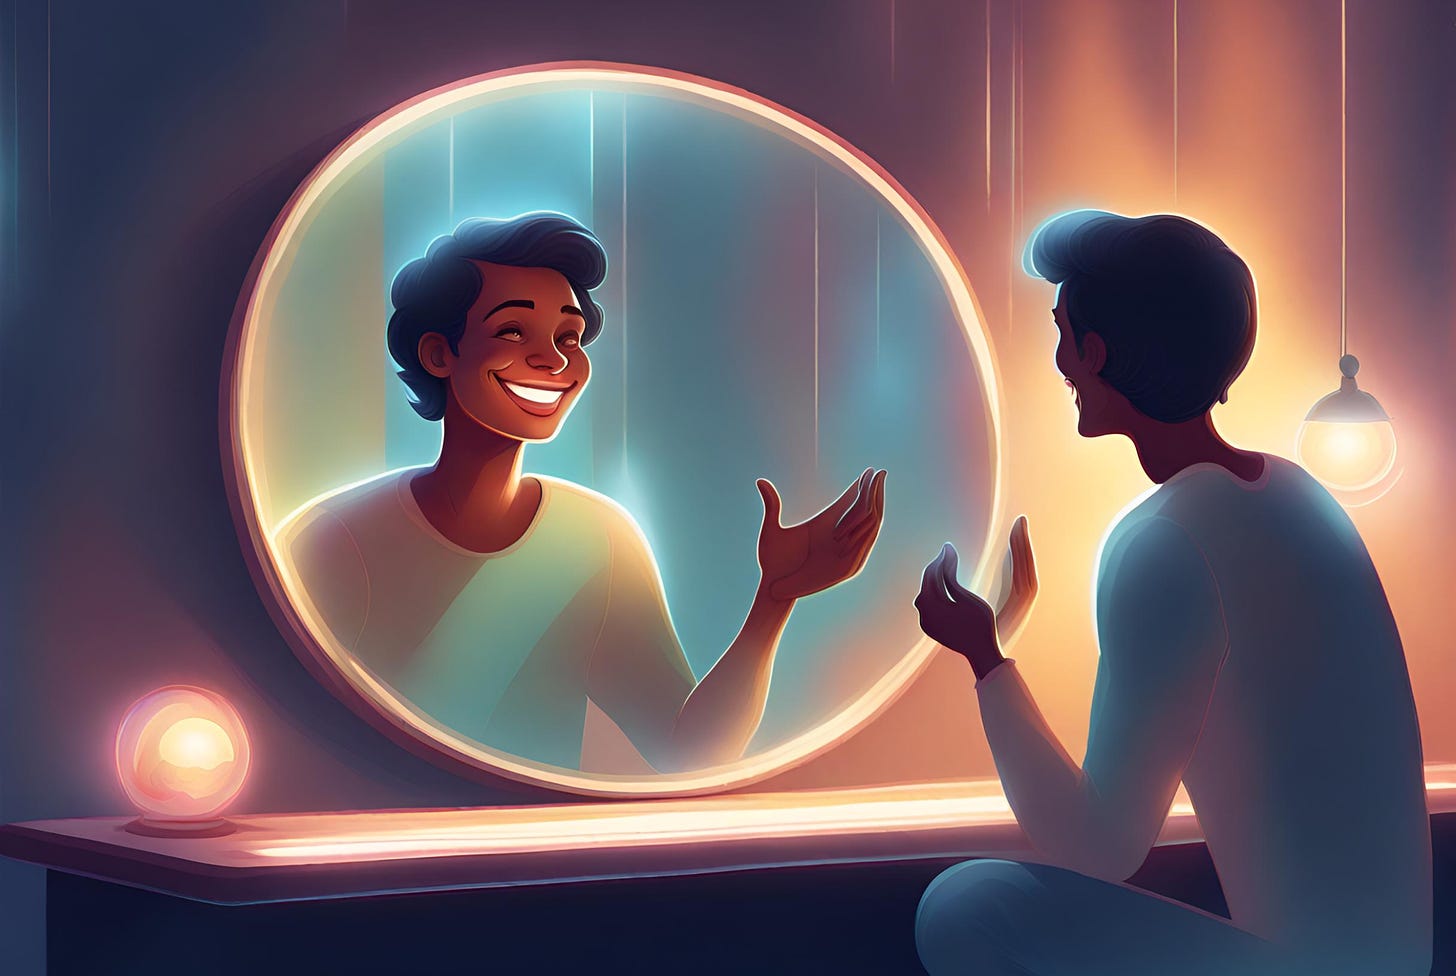 Illustration of a happy person talking to their reflection in a mirror